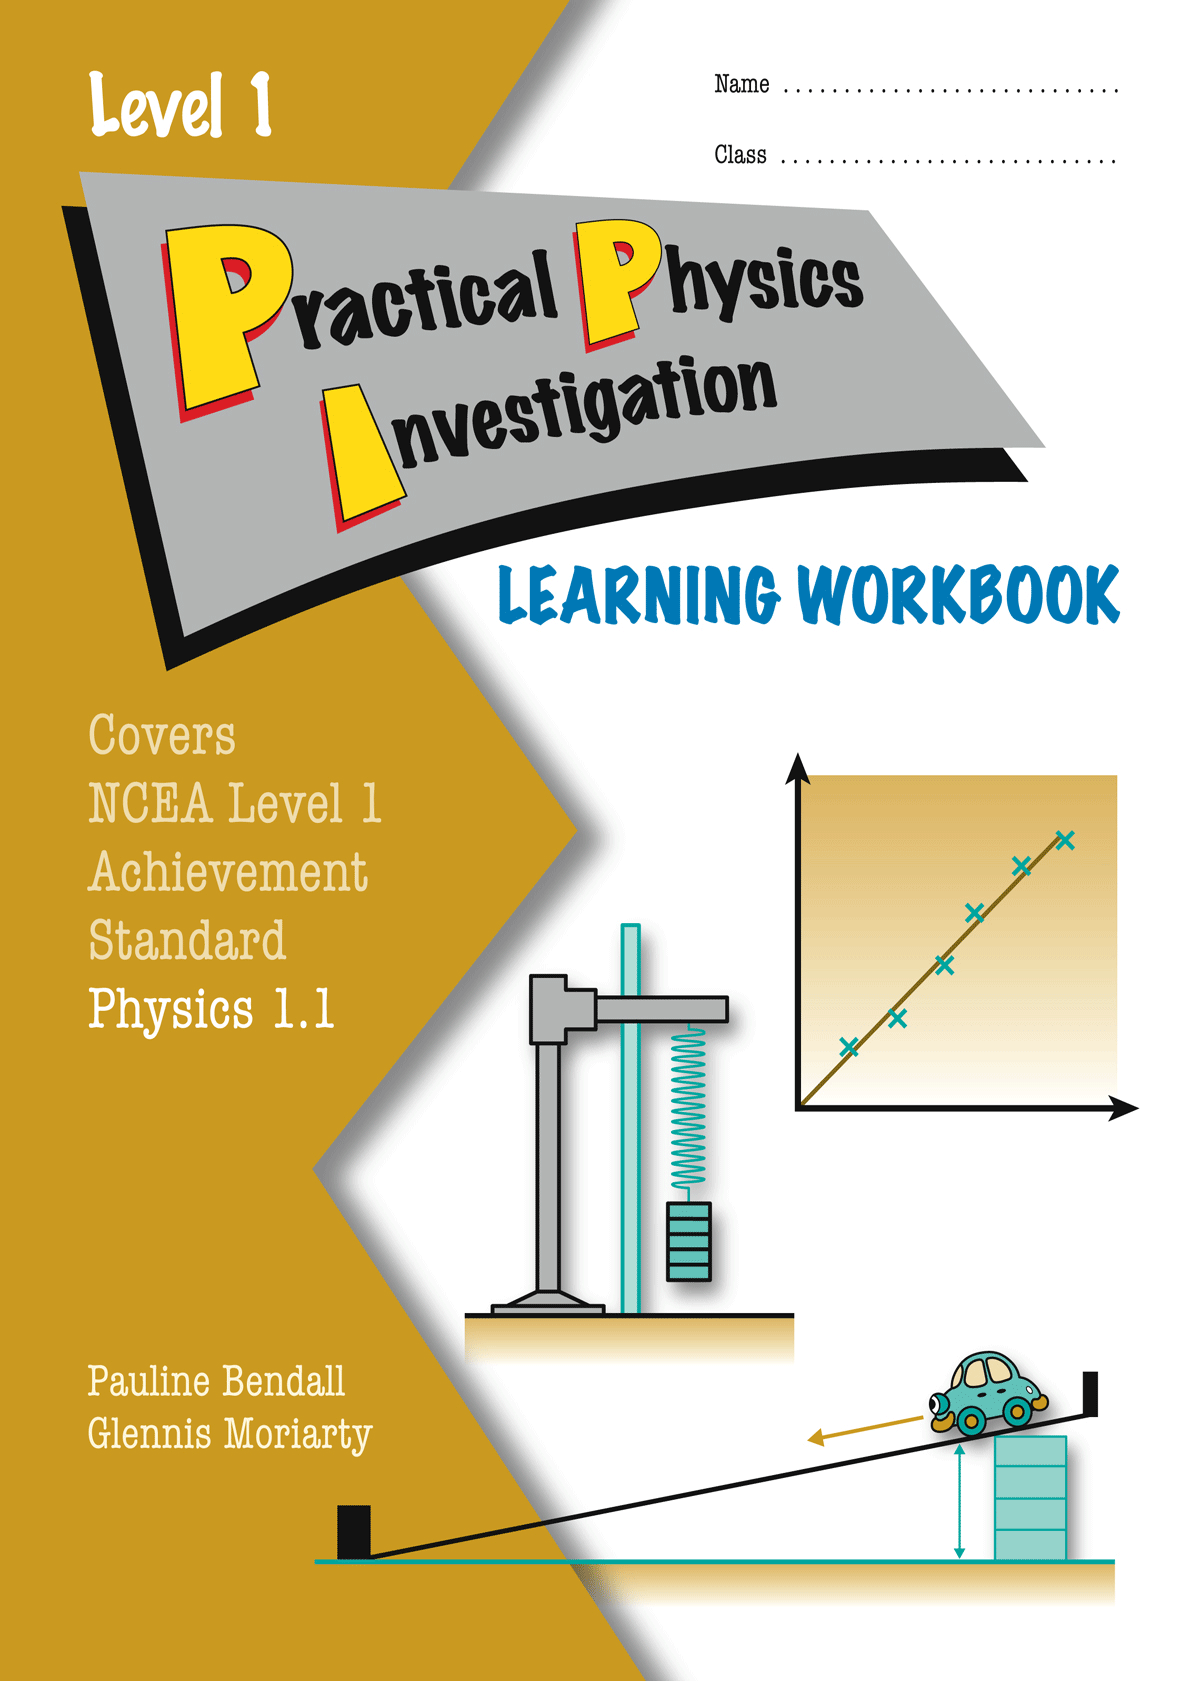 Level 1 Practical Physics Investigation 1.1 Learning Workbook